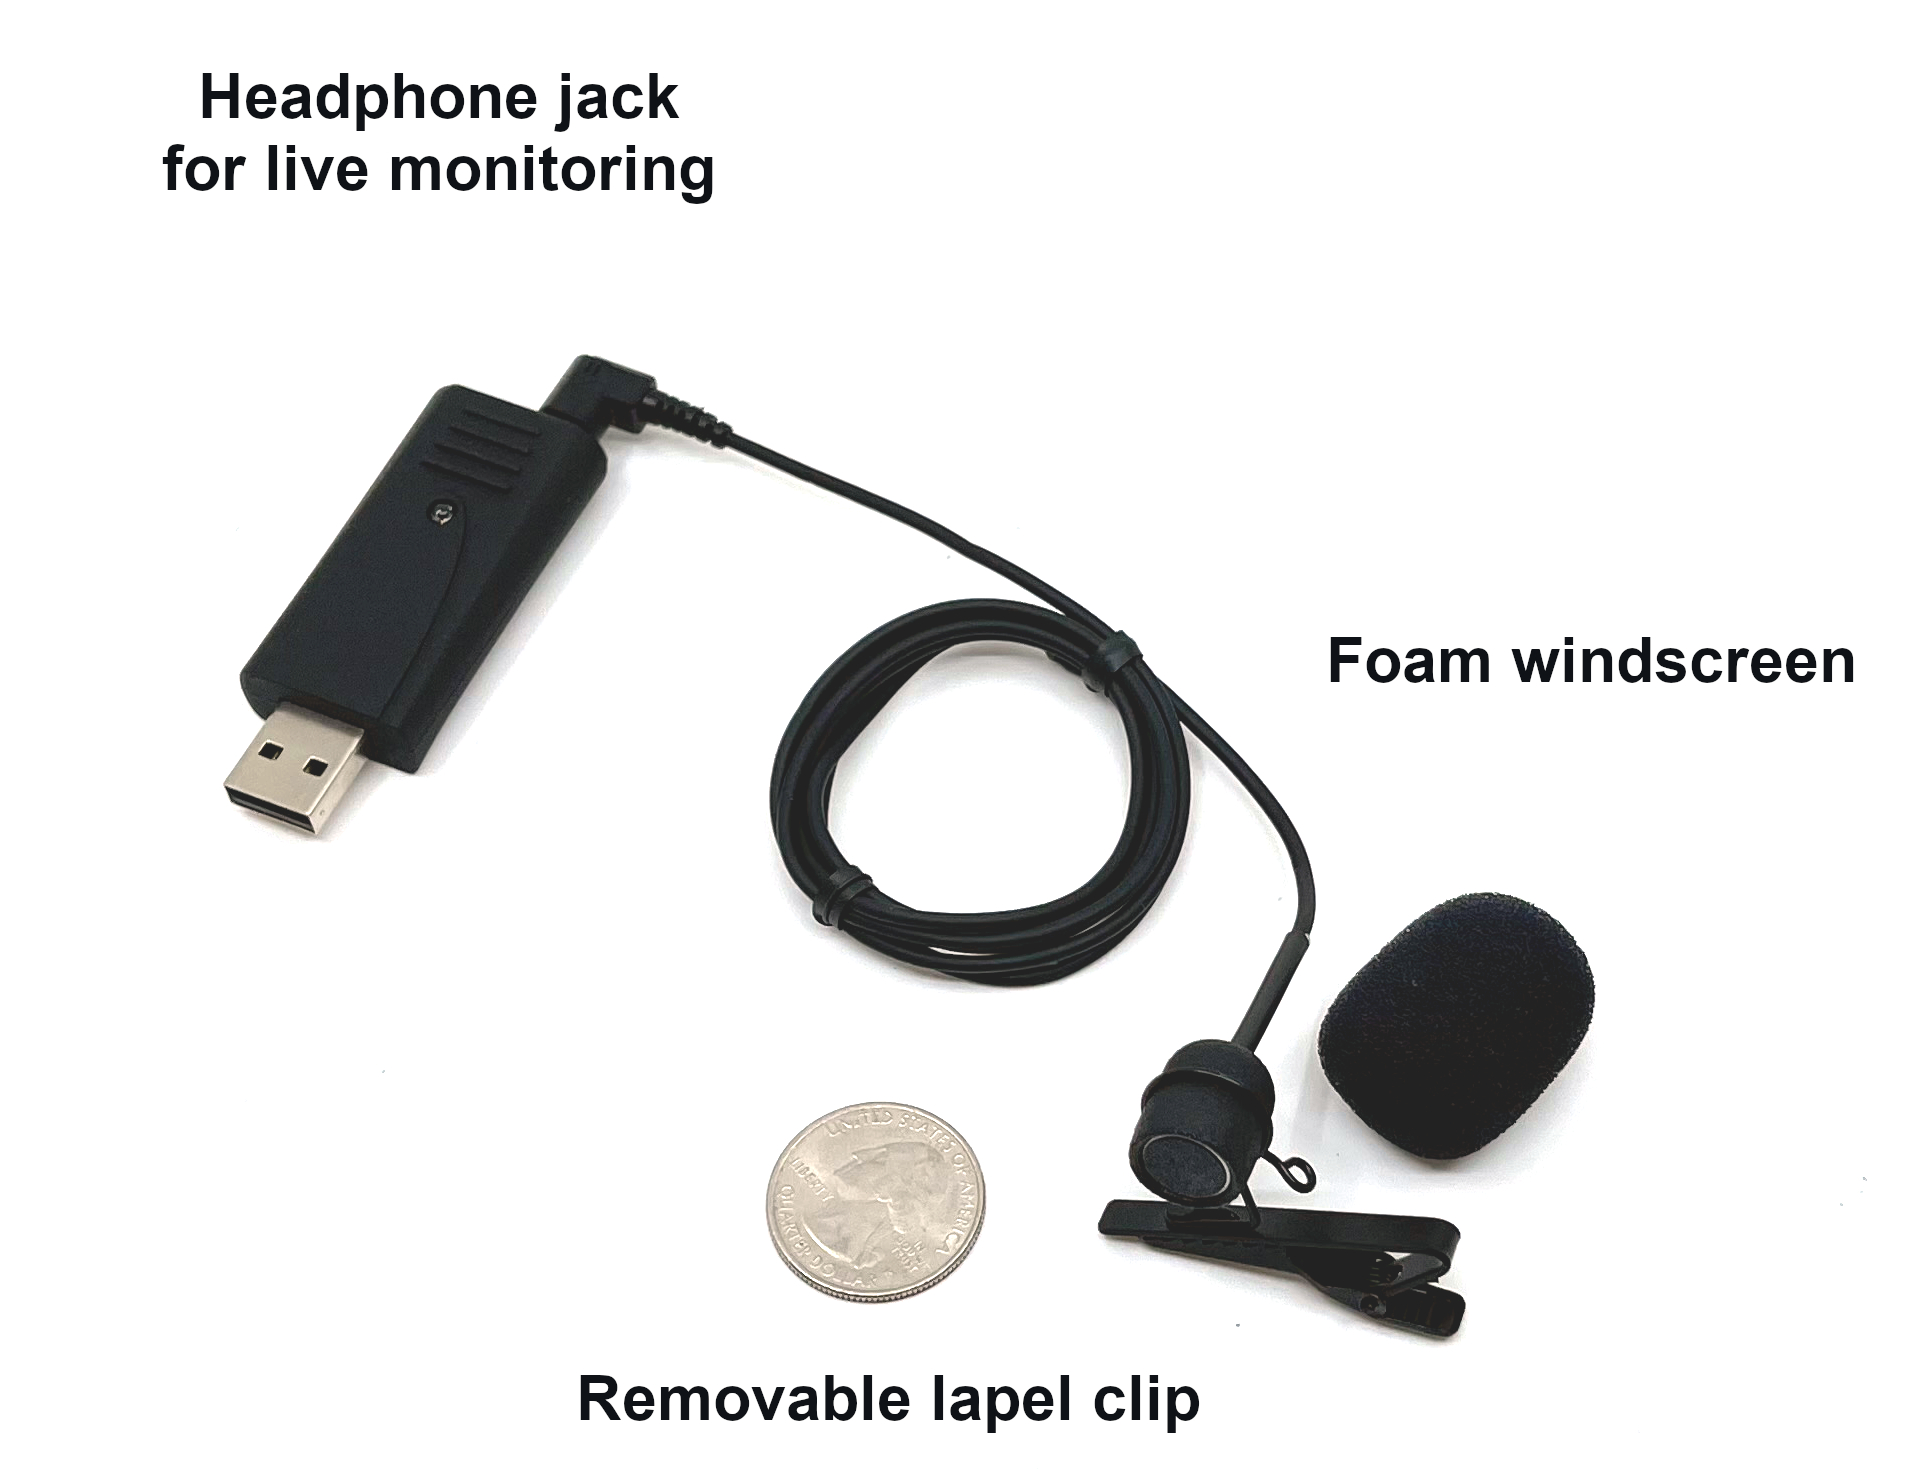 Sound Professionals MS-USB-LAPEL-1-MKII - The Master Series by The Sound Professionals lapel omni-directional microphone is very small - about size of pencil eraser tip (roughly 1/4" in diameter 1/2" long ).